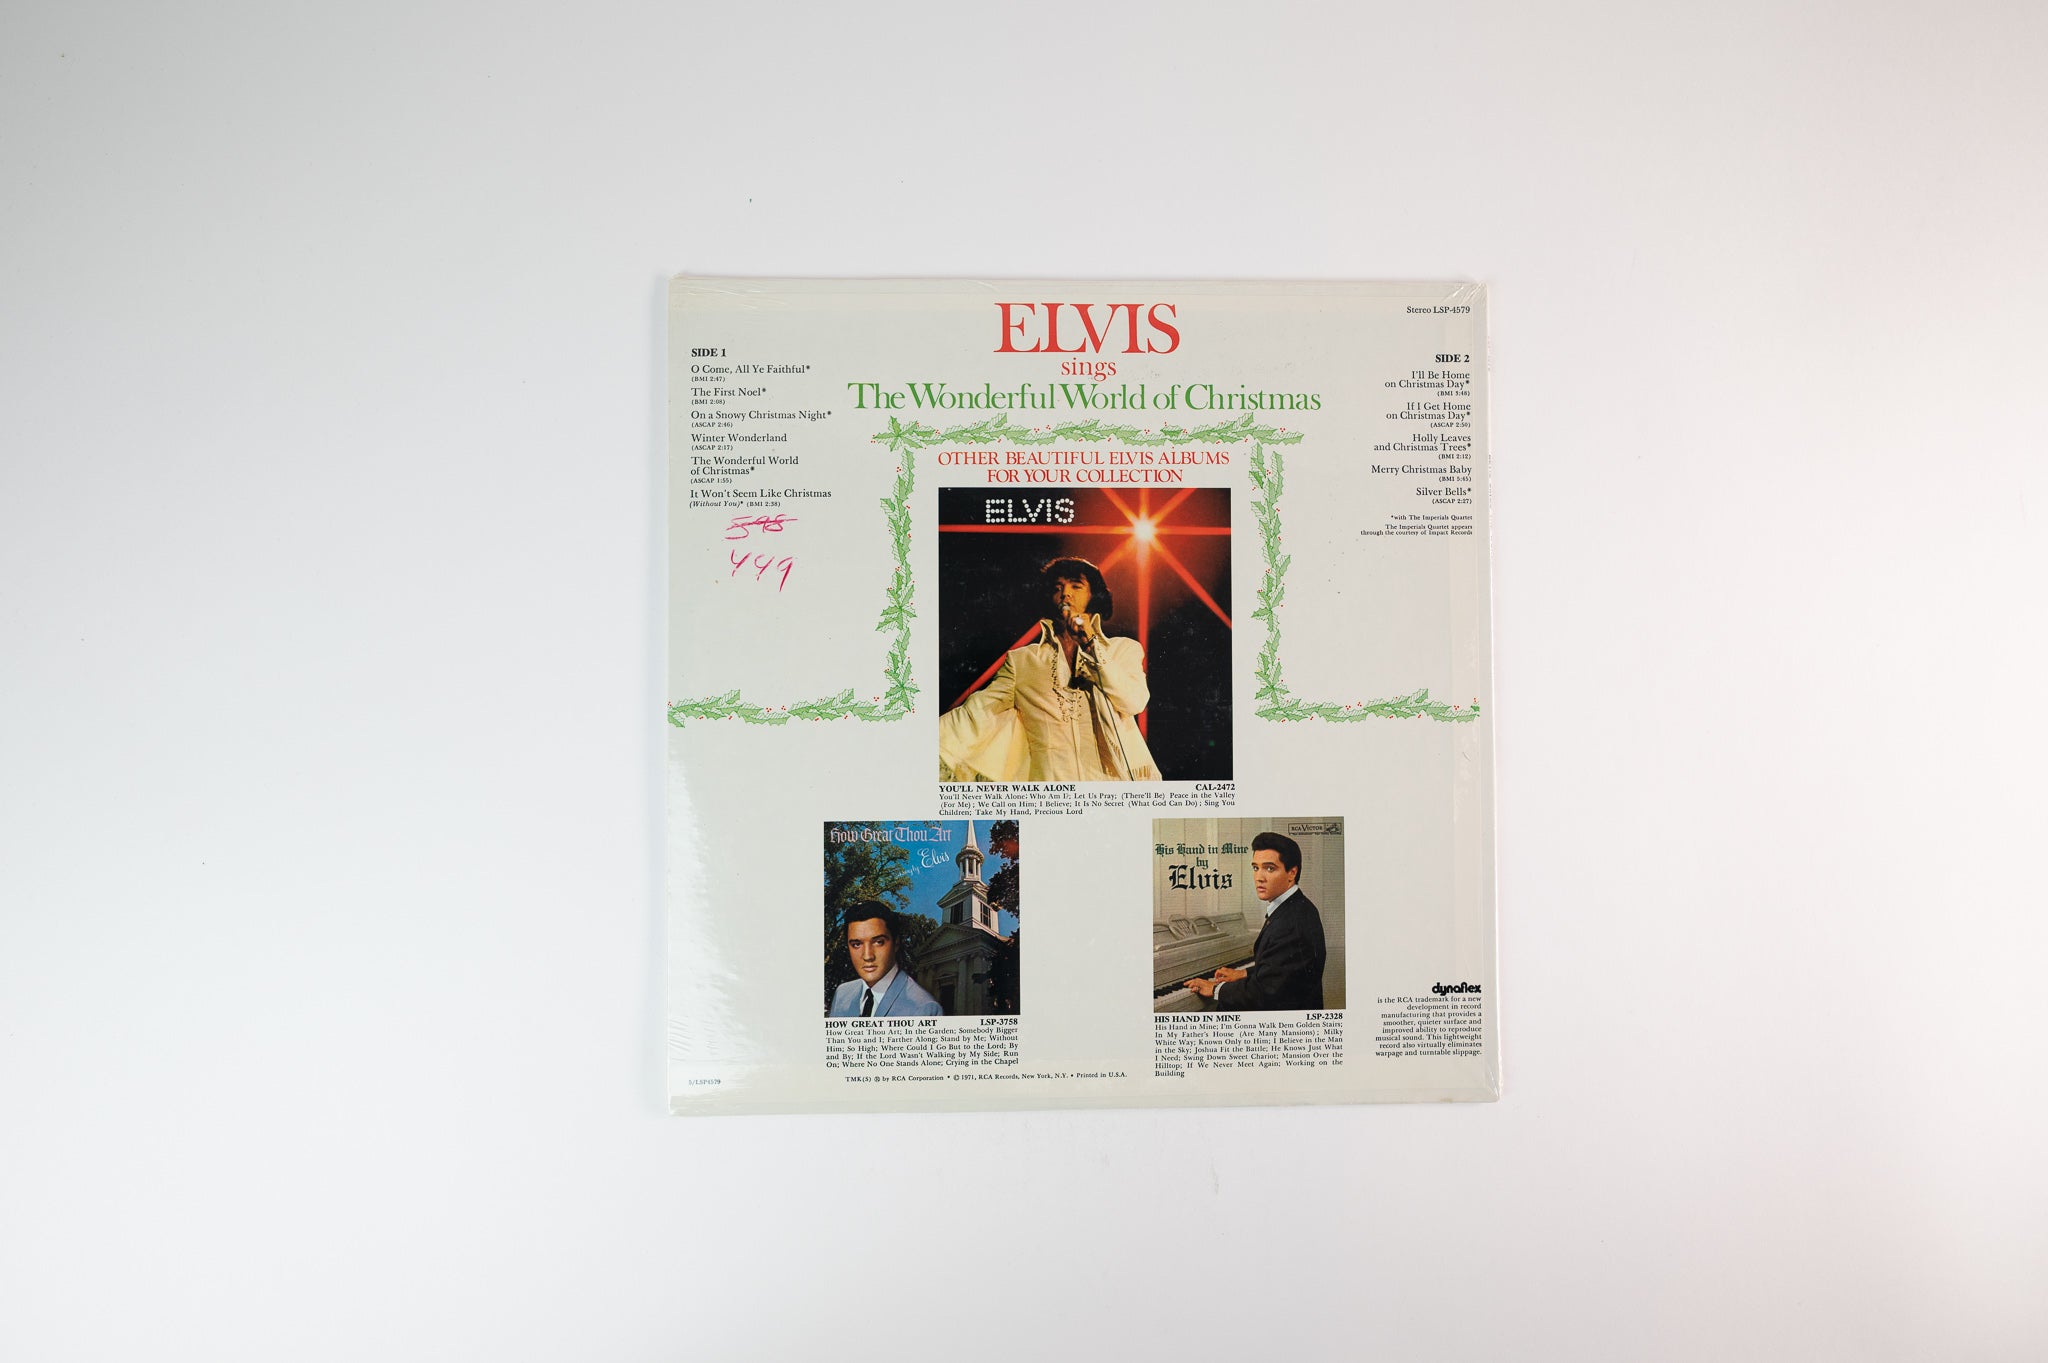 Elvis Presley - Elvis Sings The Wonderful World Of Christmas on RCA First Press With Xmas Card Sealed